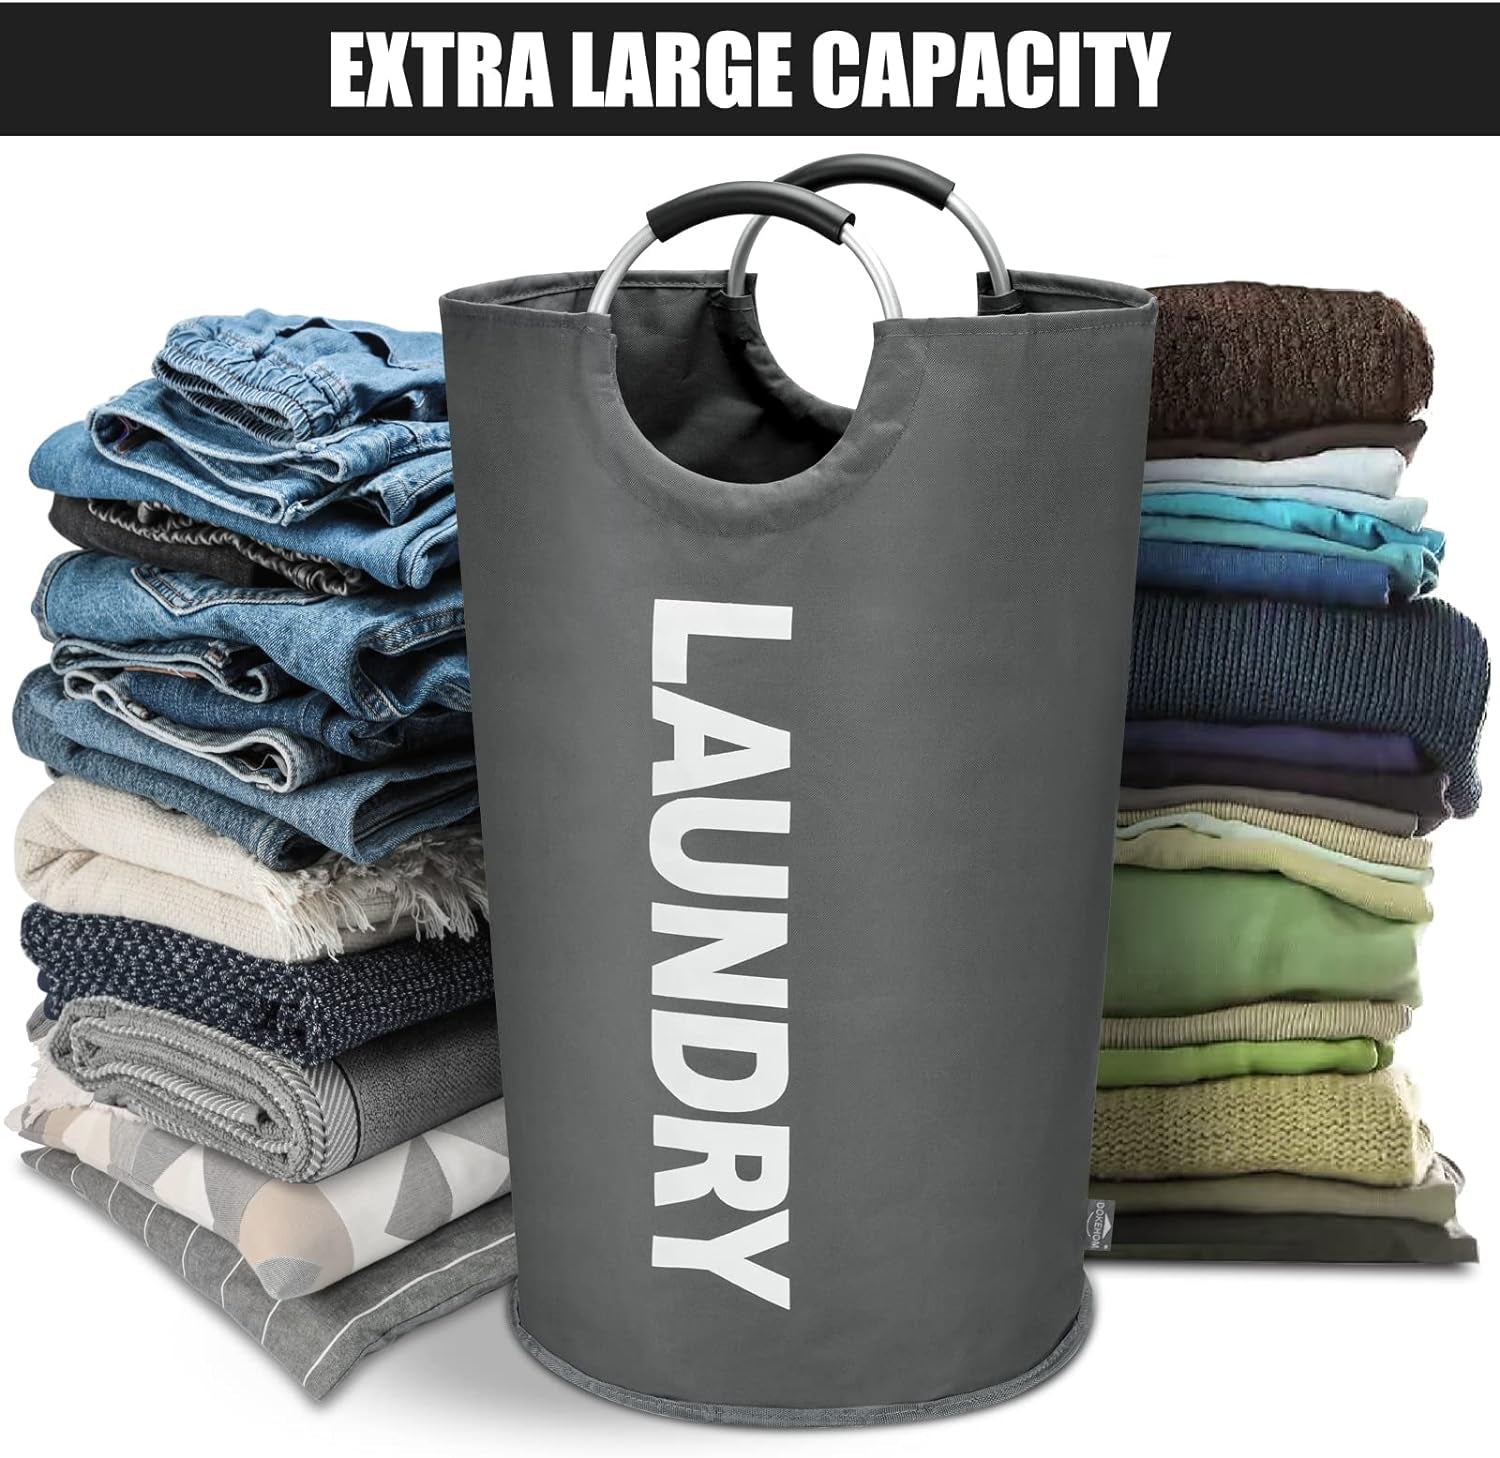 125L X-Large Collapsible Washing Laundry Basket Bag (7 Colors) for Bedroom, Fabric (Dark Grey, XL)